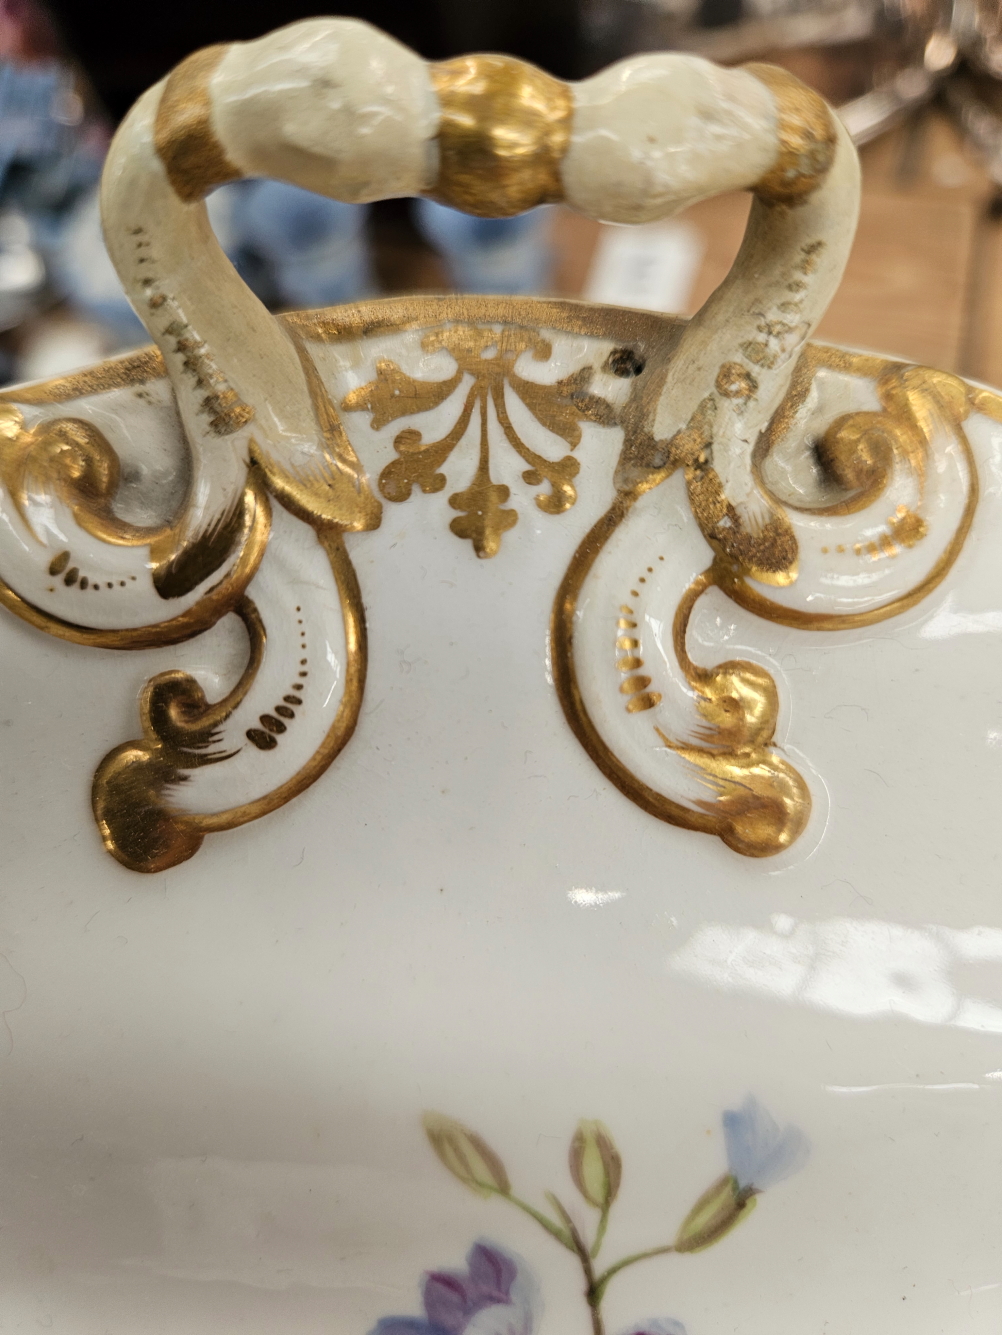 A FINE EARLY 19th C. PORCELAIN DESSERT SERVICE, HAND PAINTED WITH NAMED FLORAL BOTANICAL SPECIMENS - Image 48 of 58